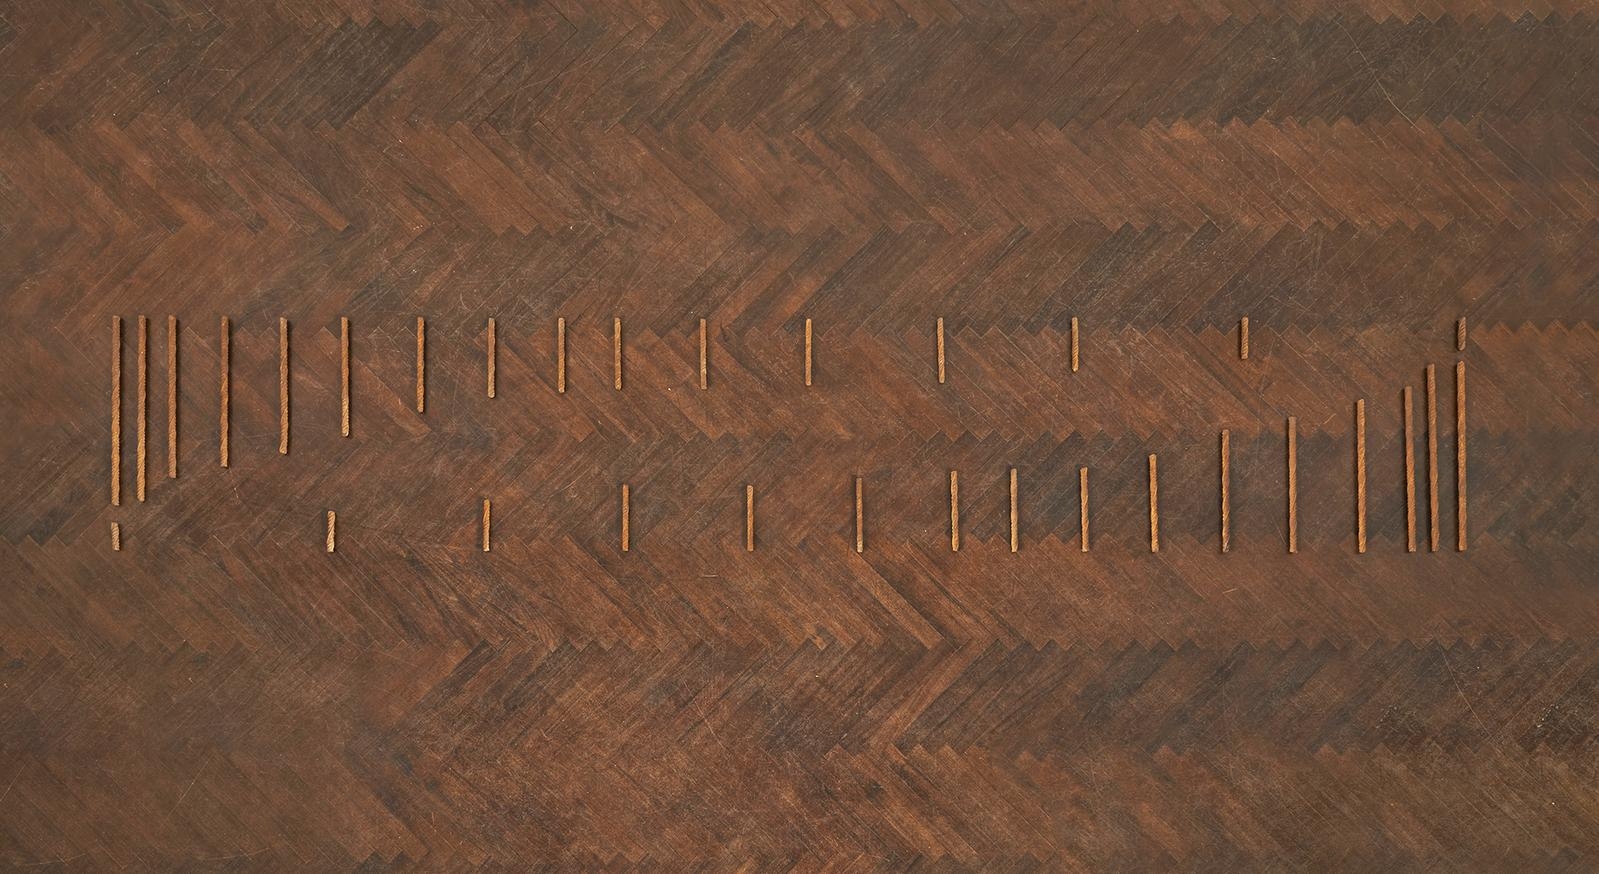 Carl Andre 32-Part Reciprocal Invention